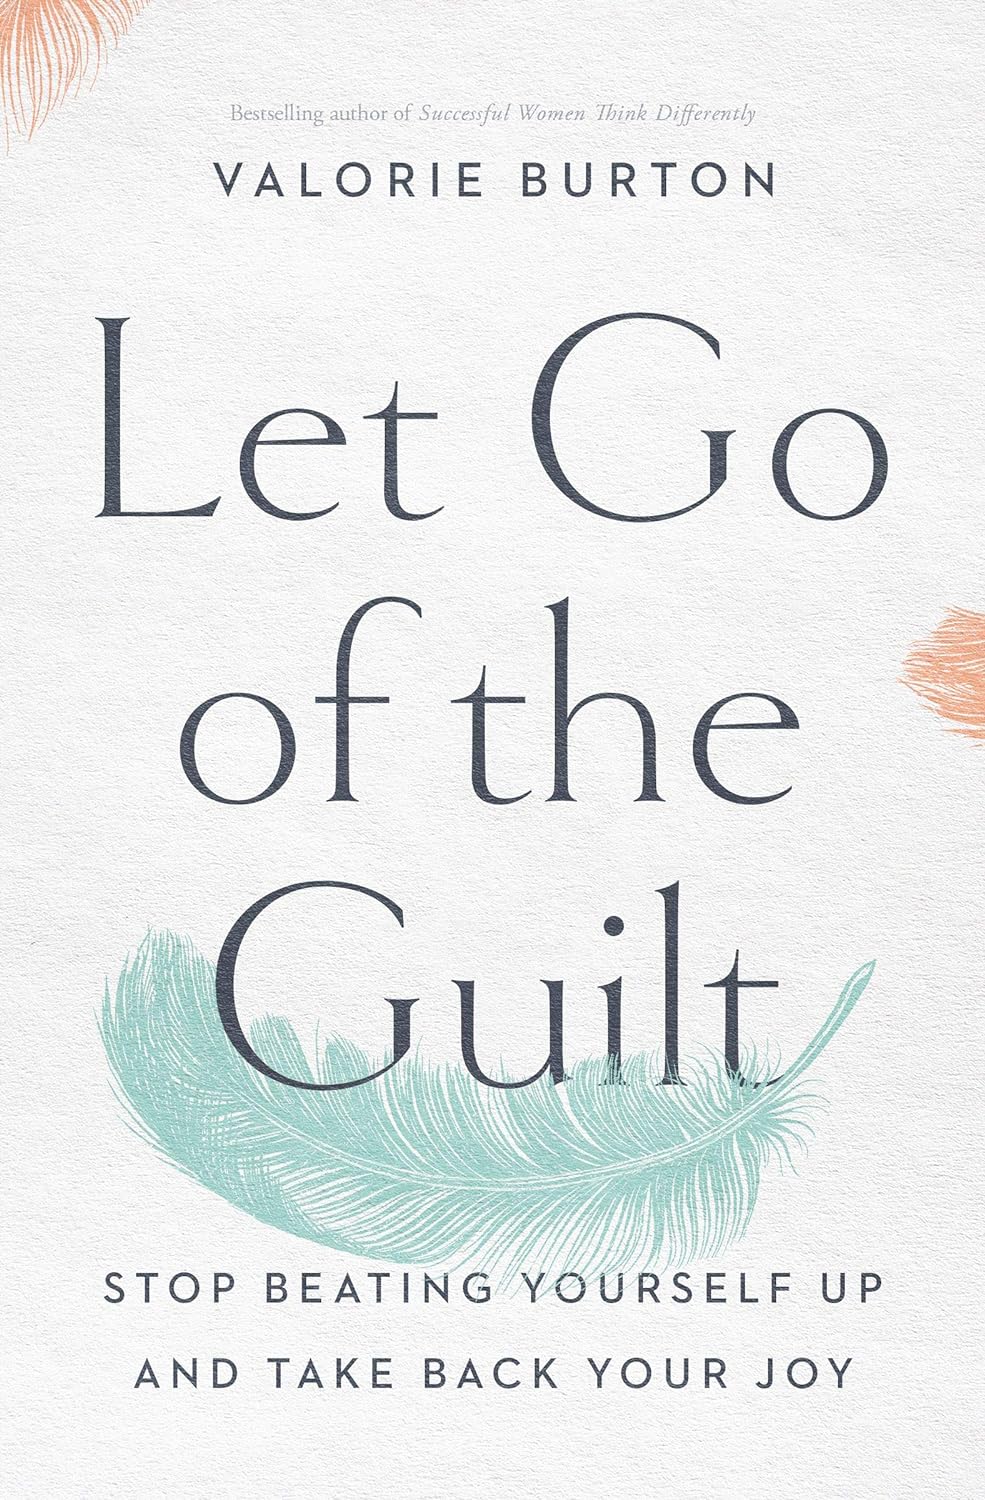 Let Go of the Guilt: Stop Beating Yourself Up and Take Back Your Joy by Valorie Burton